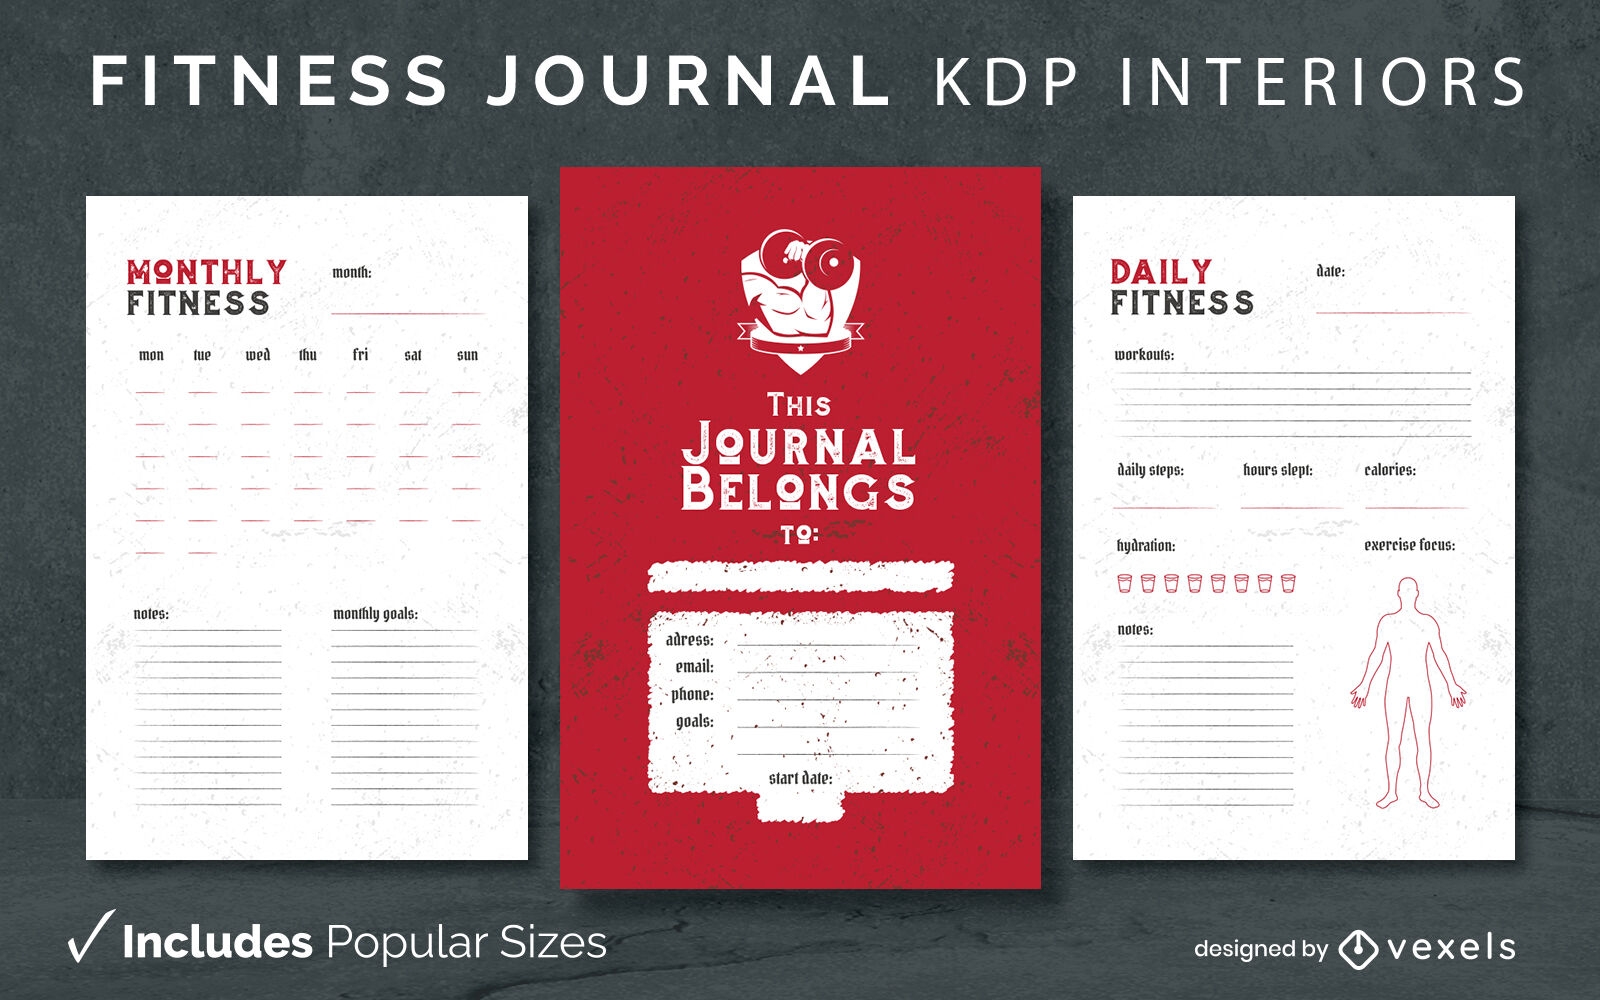 Fitness journal diary design template KDP